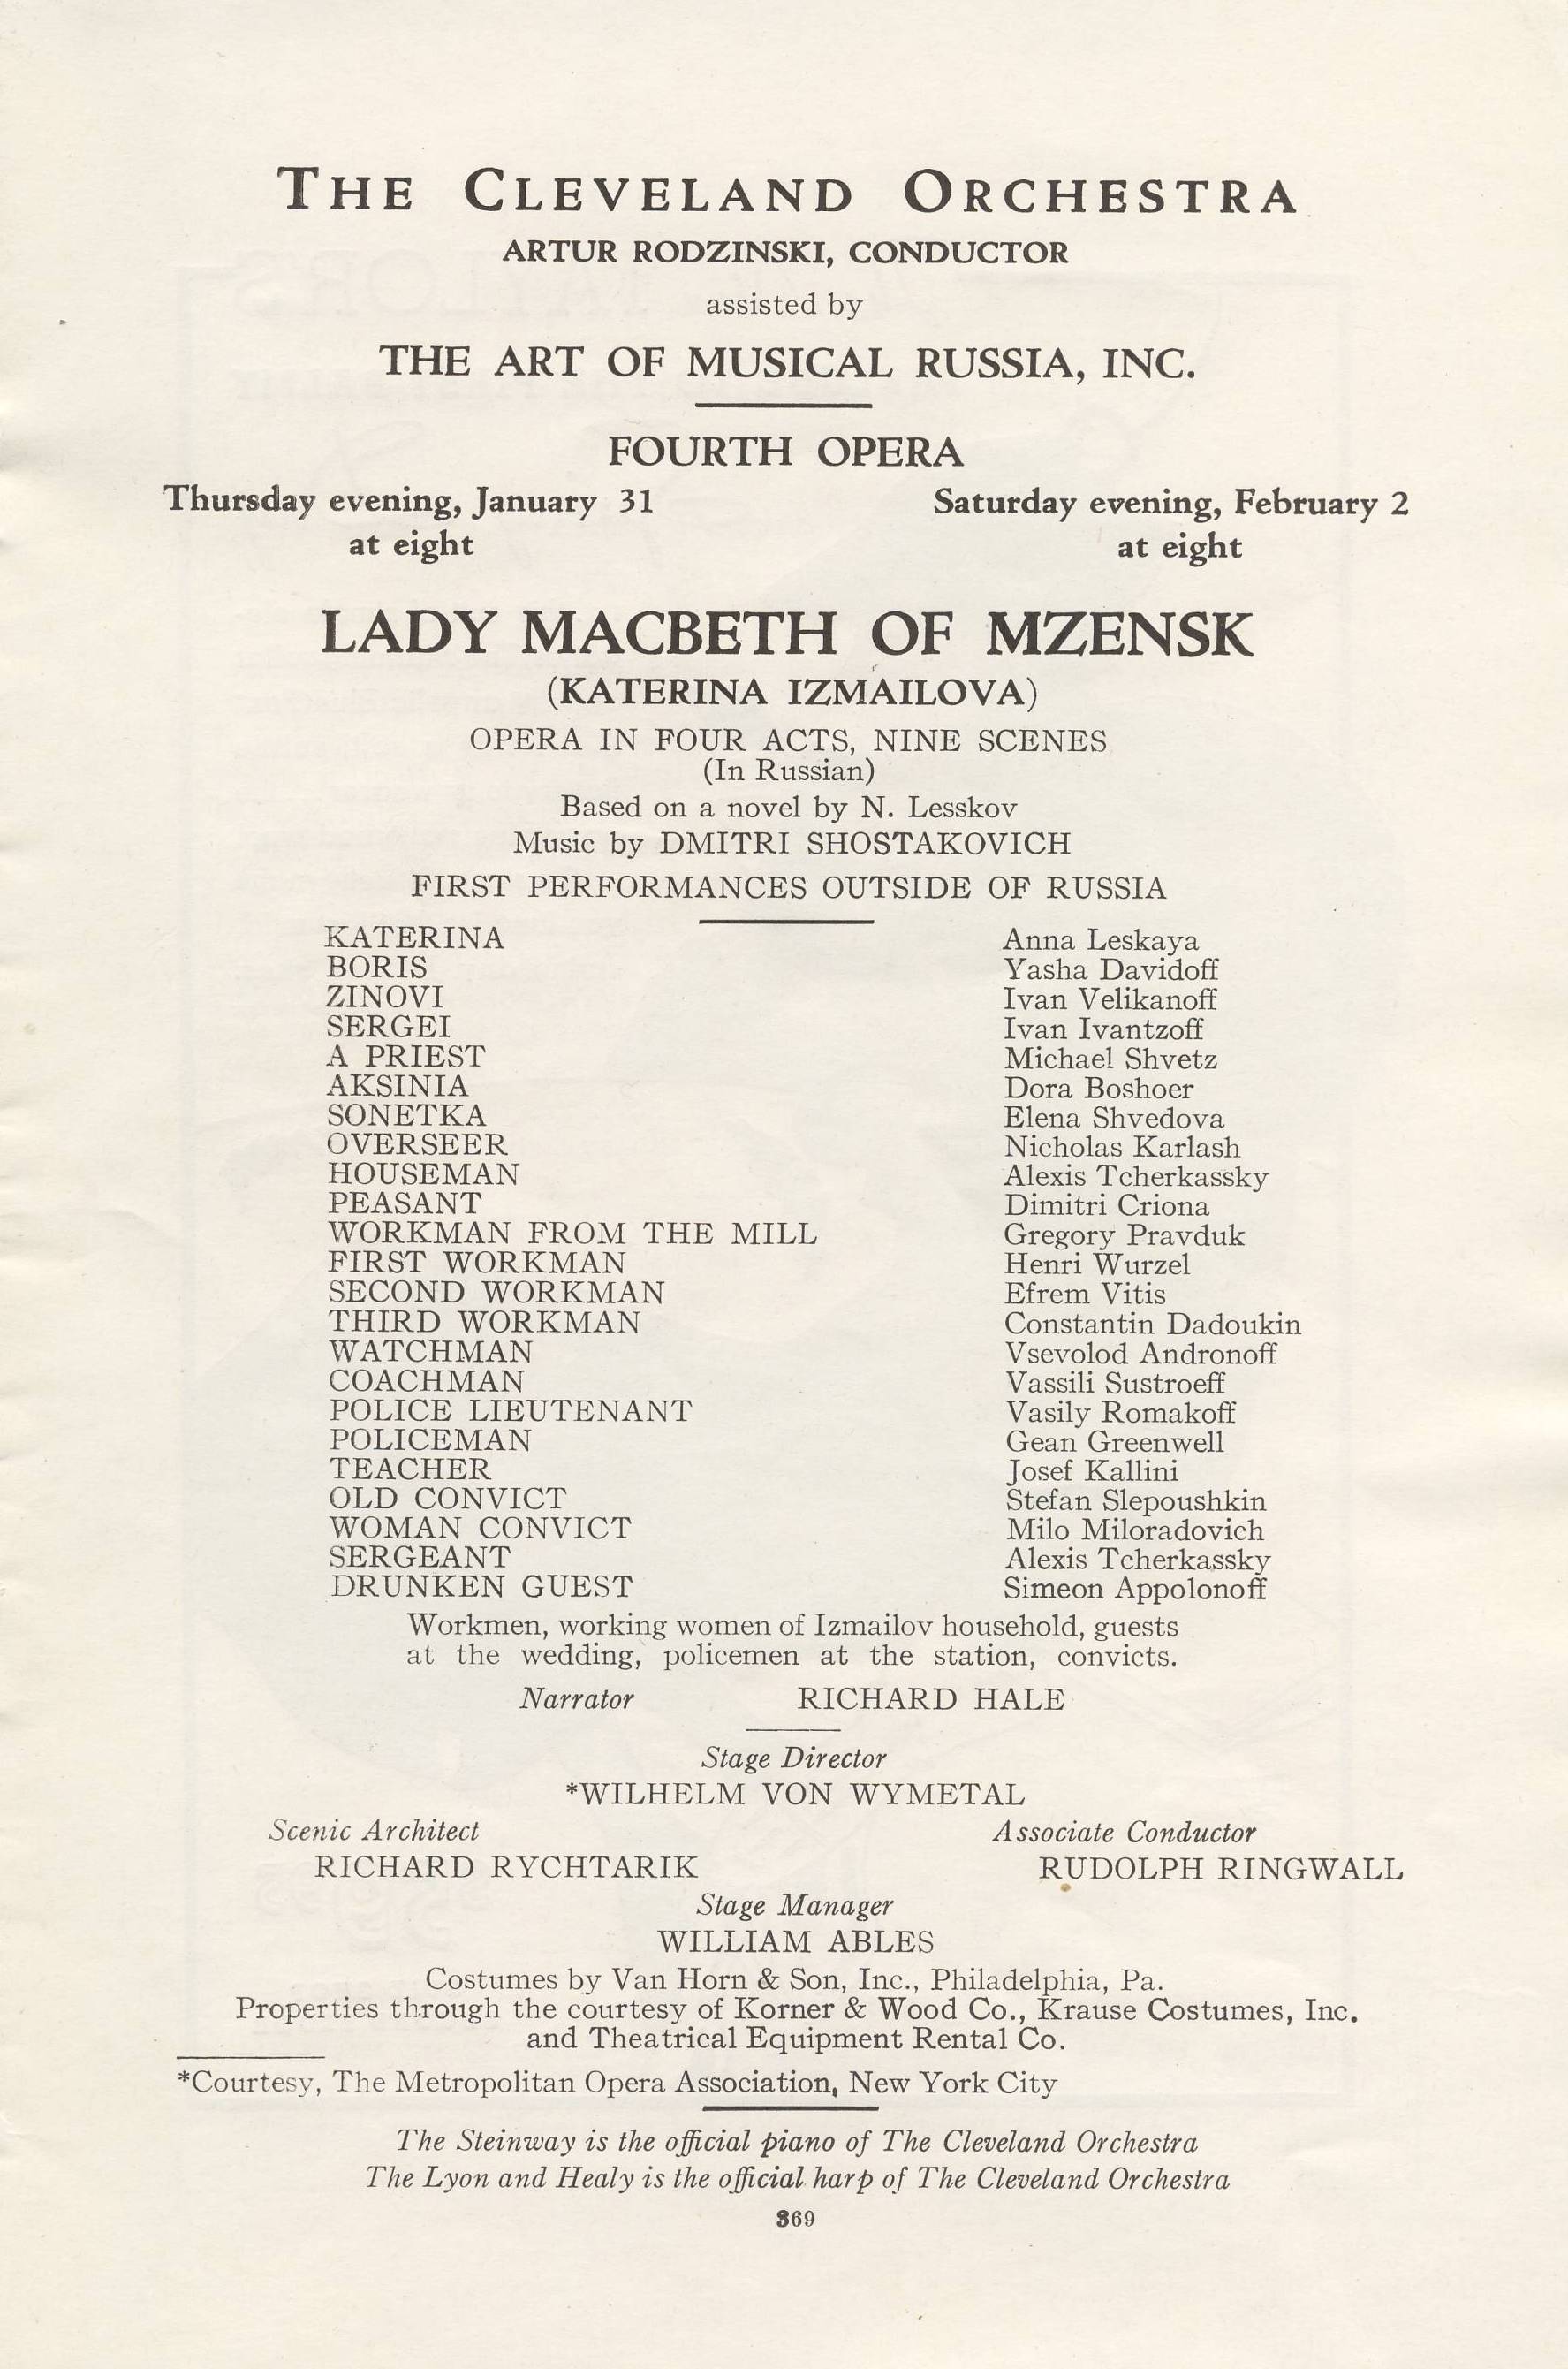 Right: Program from opening night of Lady Macbeth, 1934